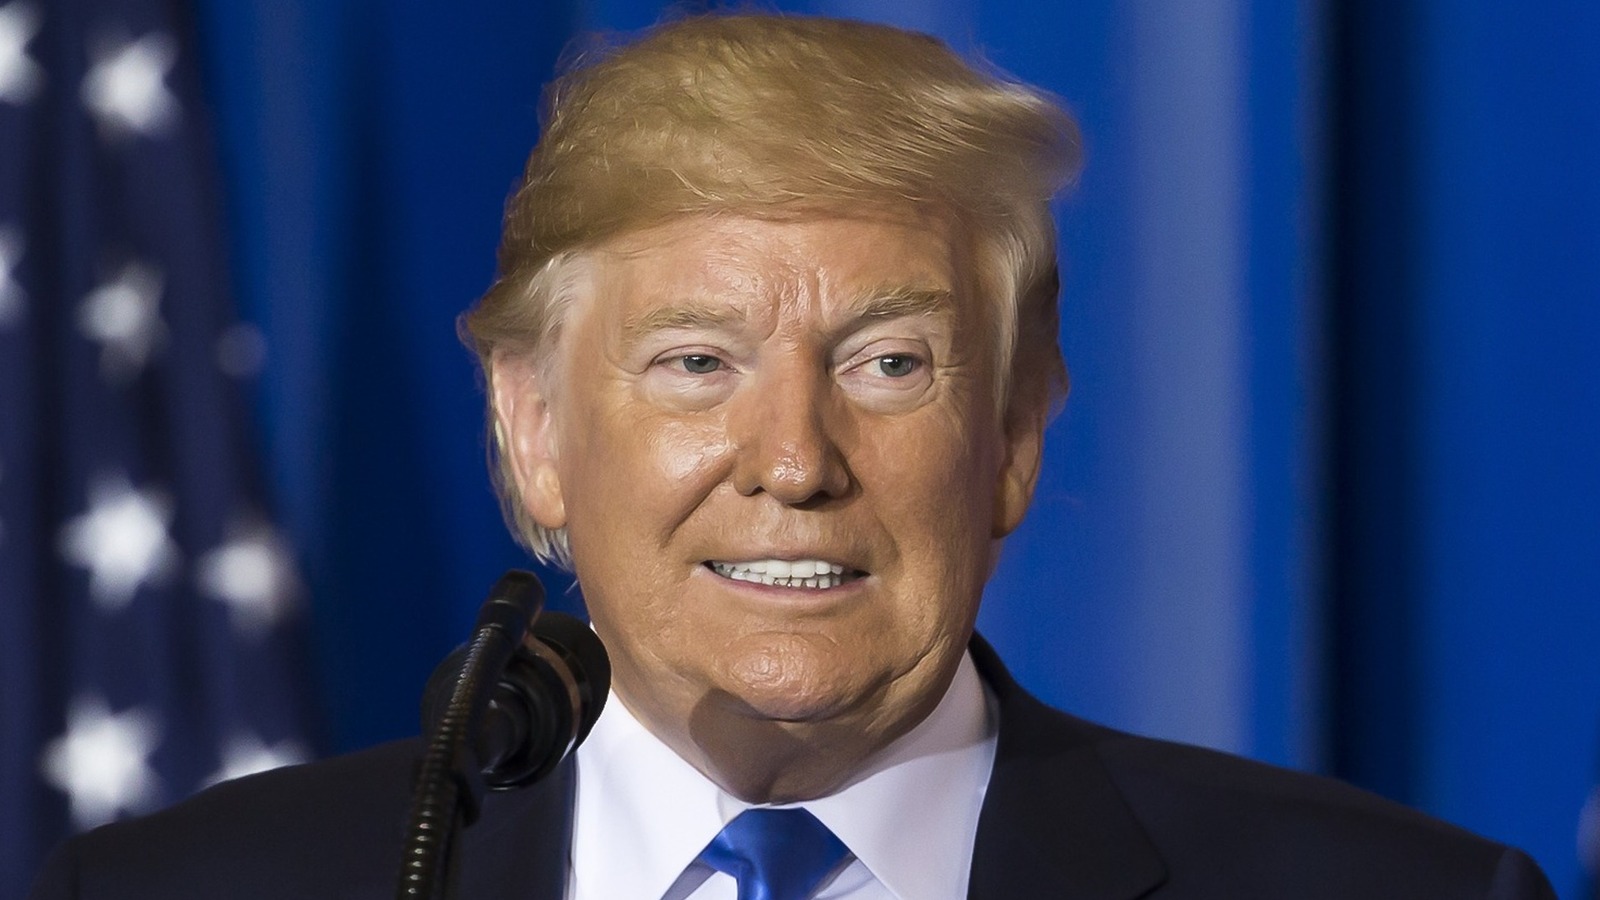 We wanted to see Donald Trump without his famous disaster hairstyle, so we made it possible